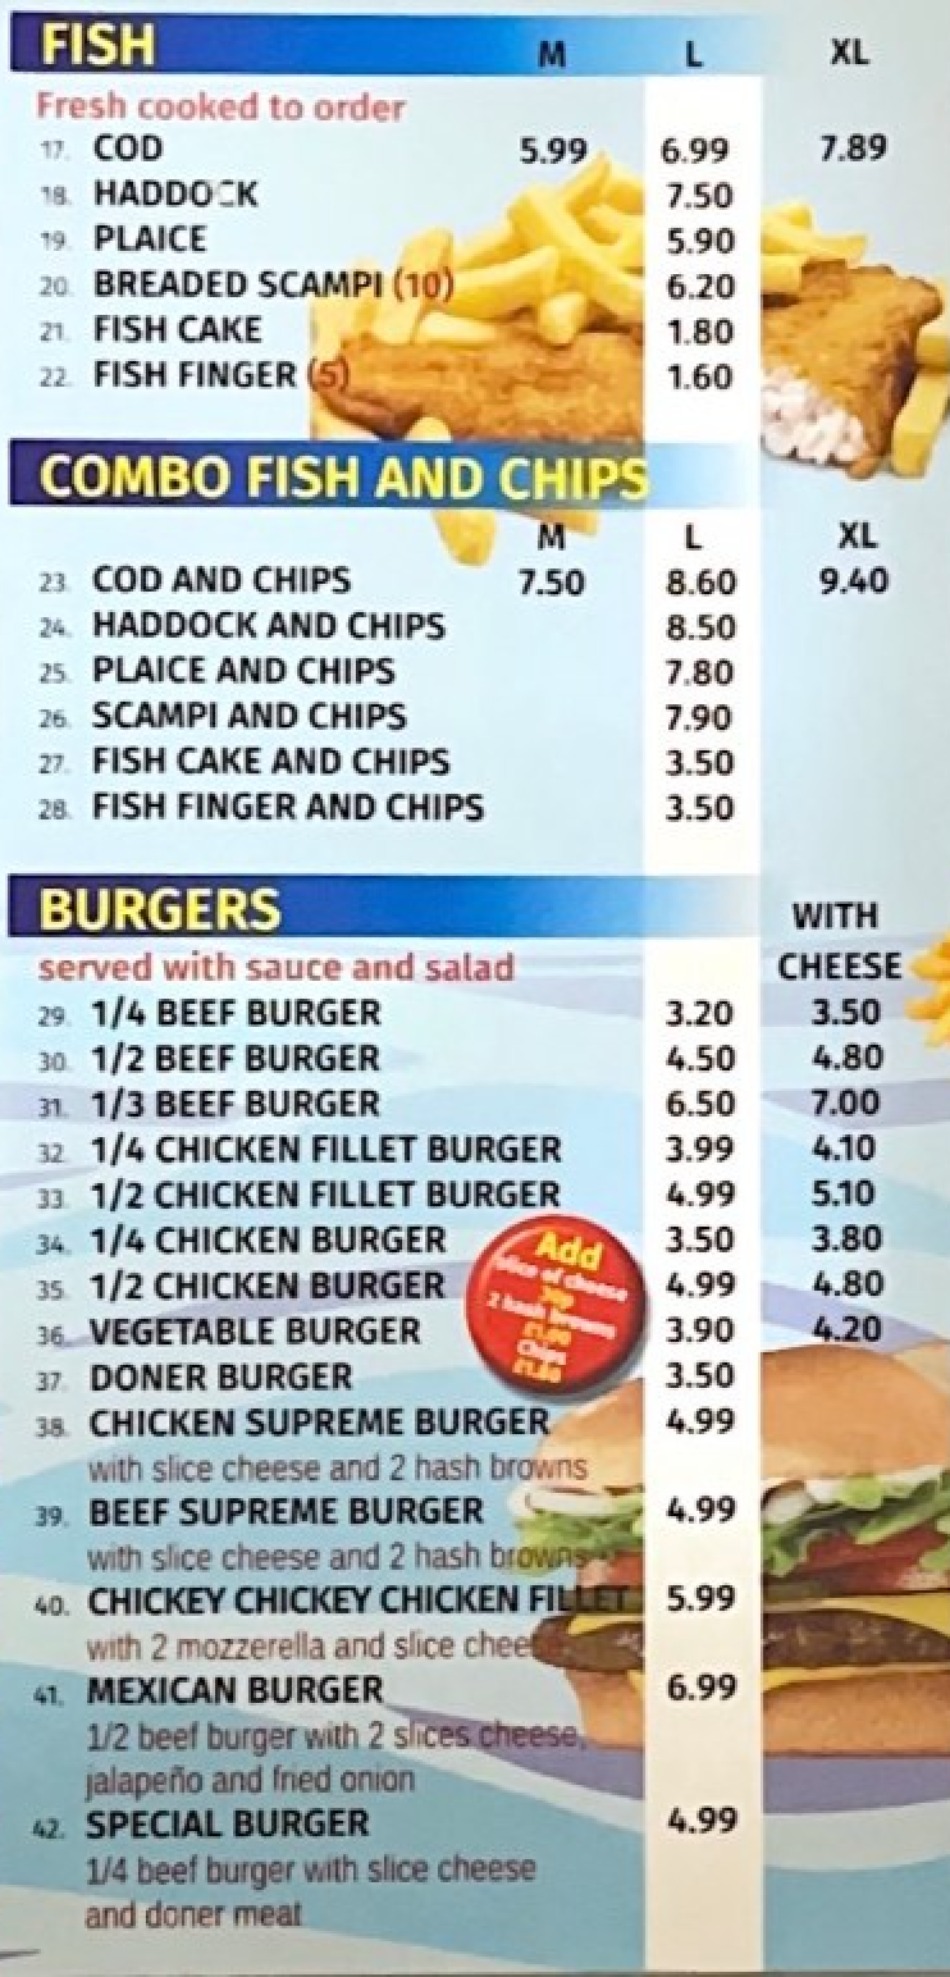 Takeaway Restaurant Menu Page - East End Fish and Chip Takeaway - Plymouth